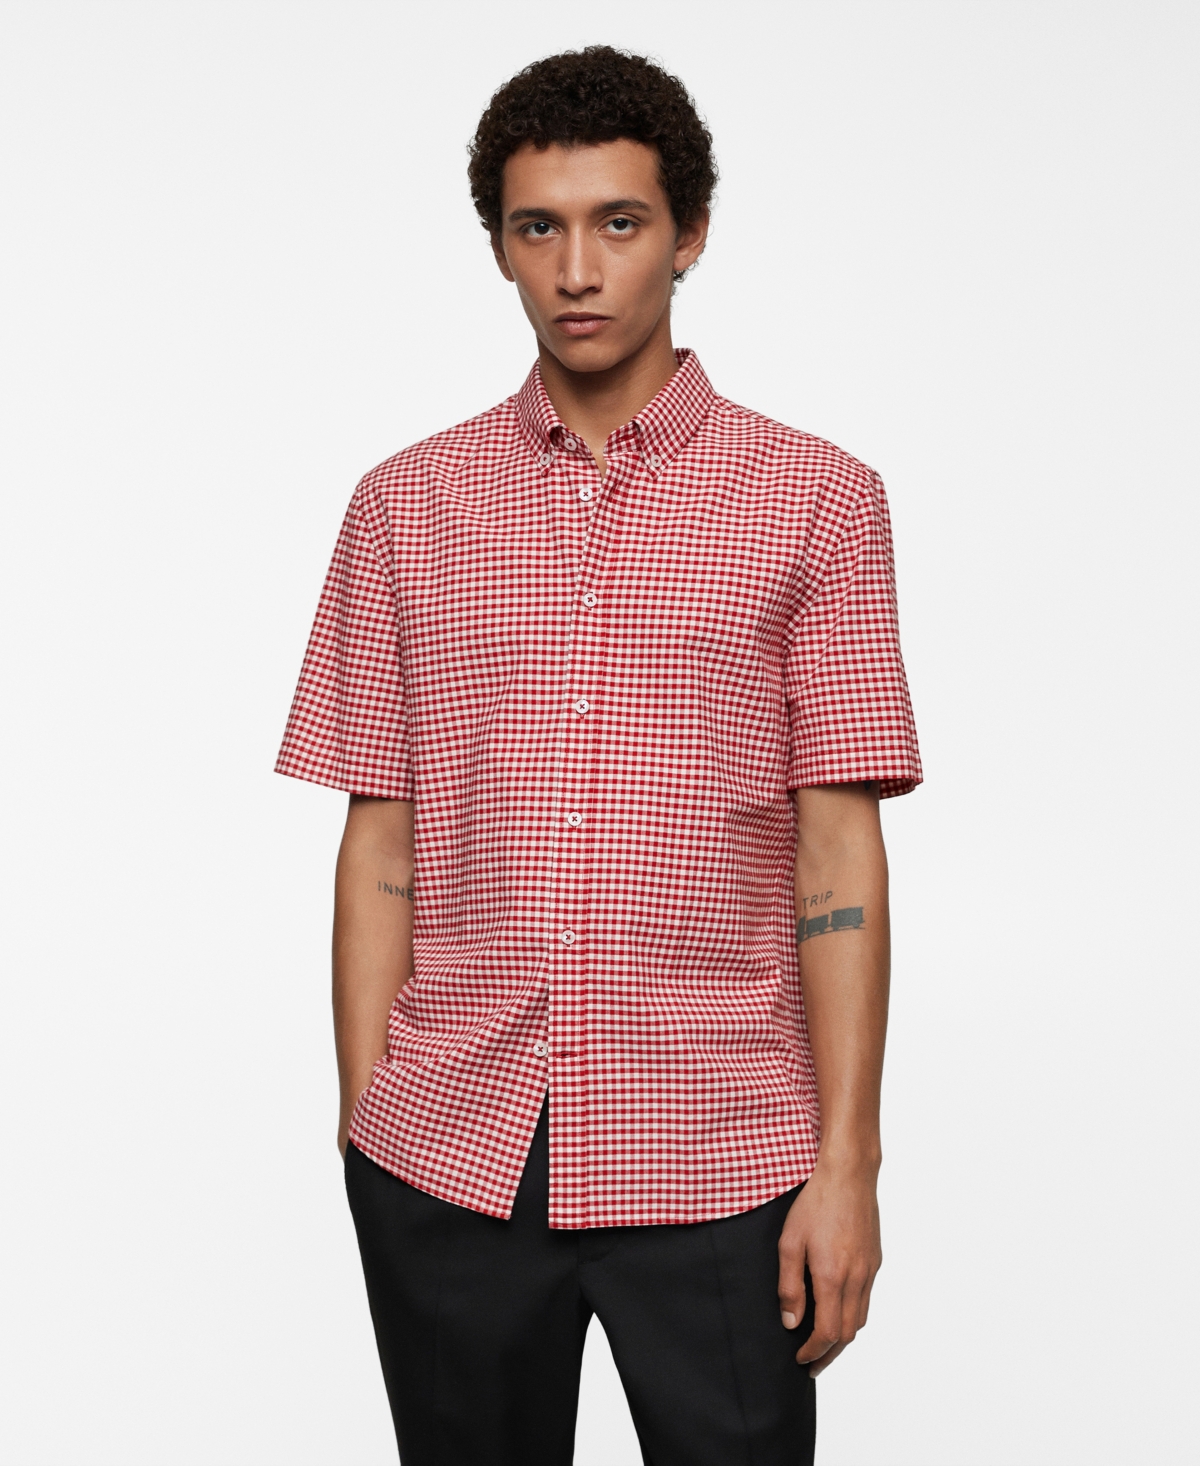 Men's 100% Cotton Short-Sleeved Printed Shirt - Red